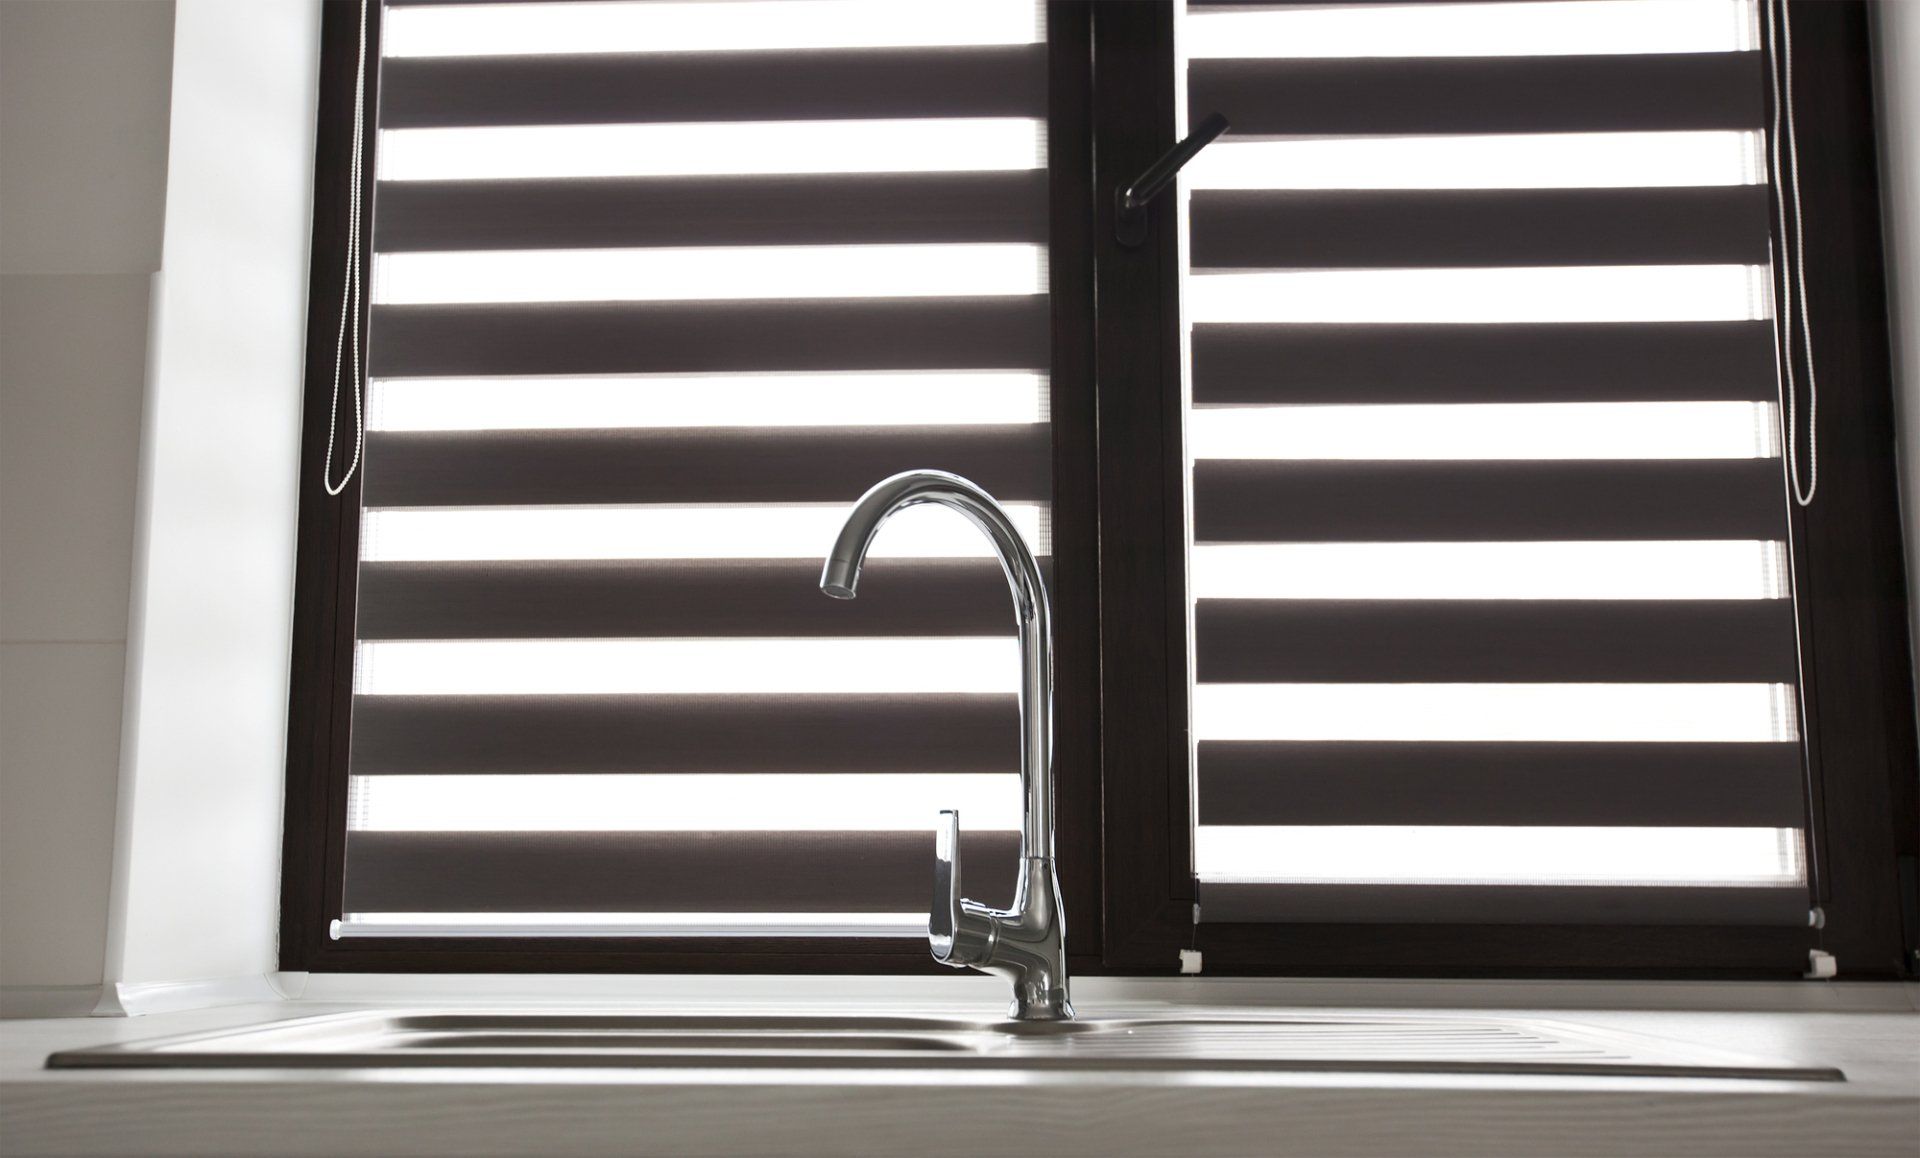 Dark plantation shutters, opened over kitchen sink and bench with chrome mixed tap.